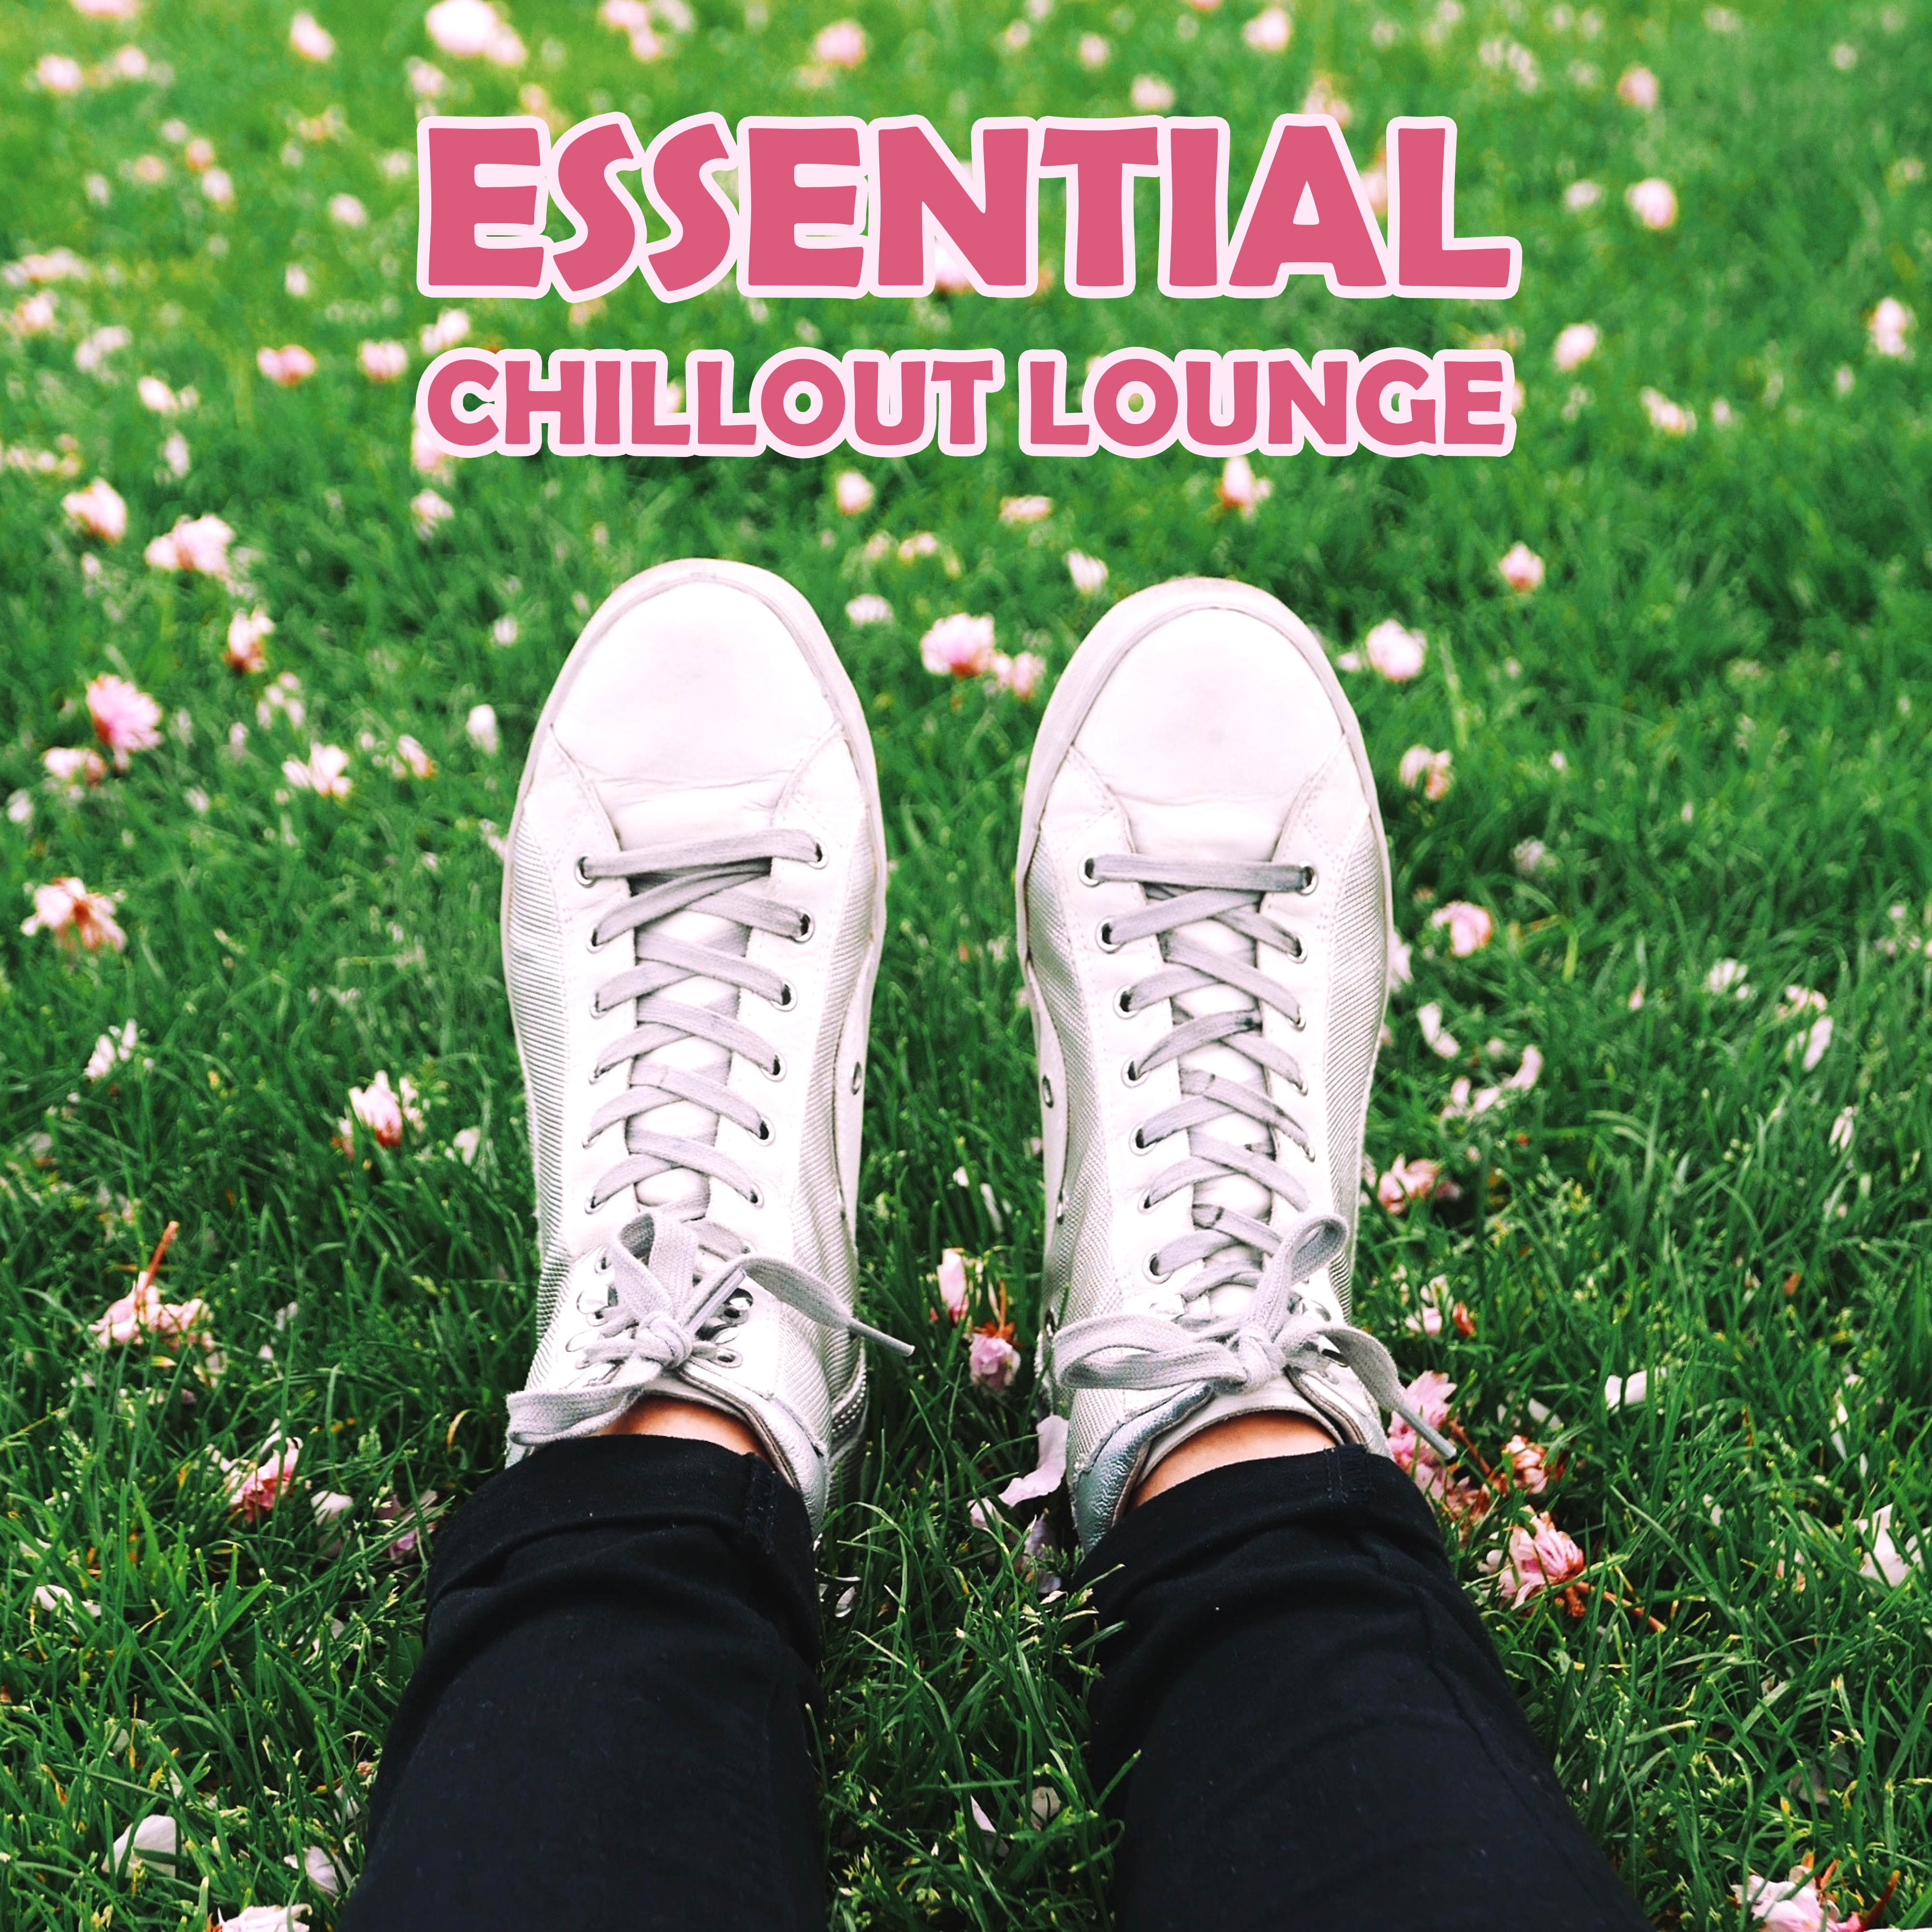 Essential Chillout Lounge – Fresh Chill Out Vibrations, Relax & Chill, Lounge